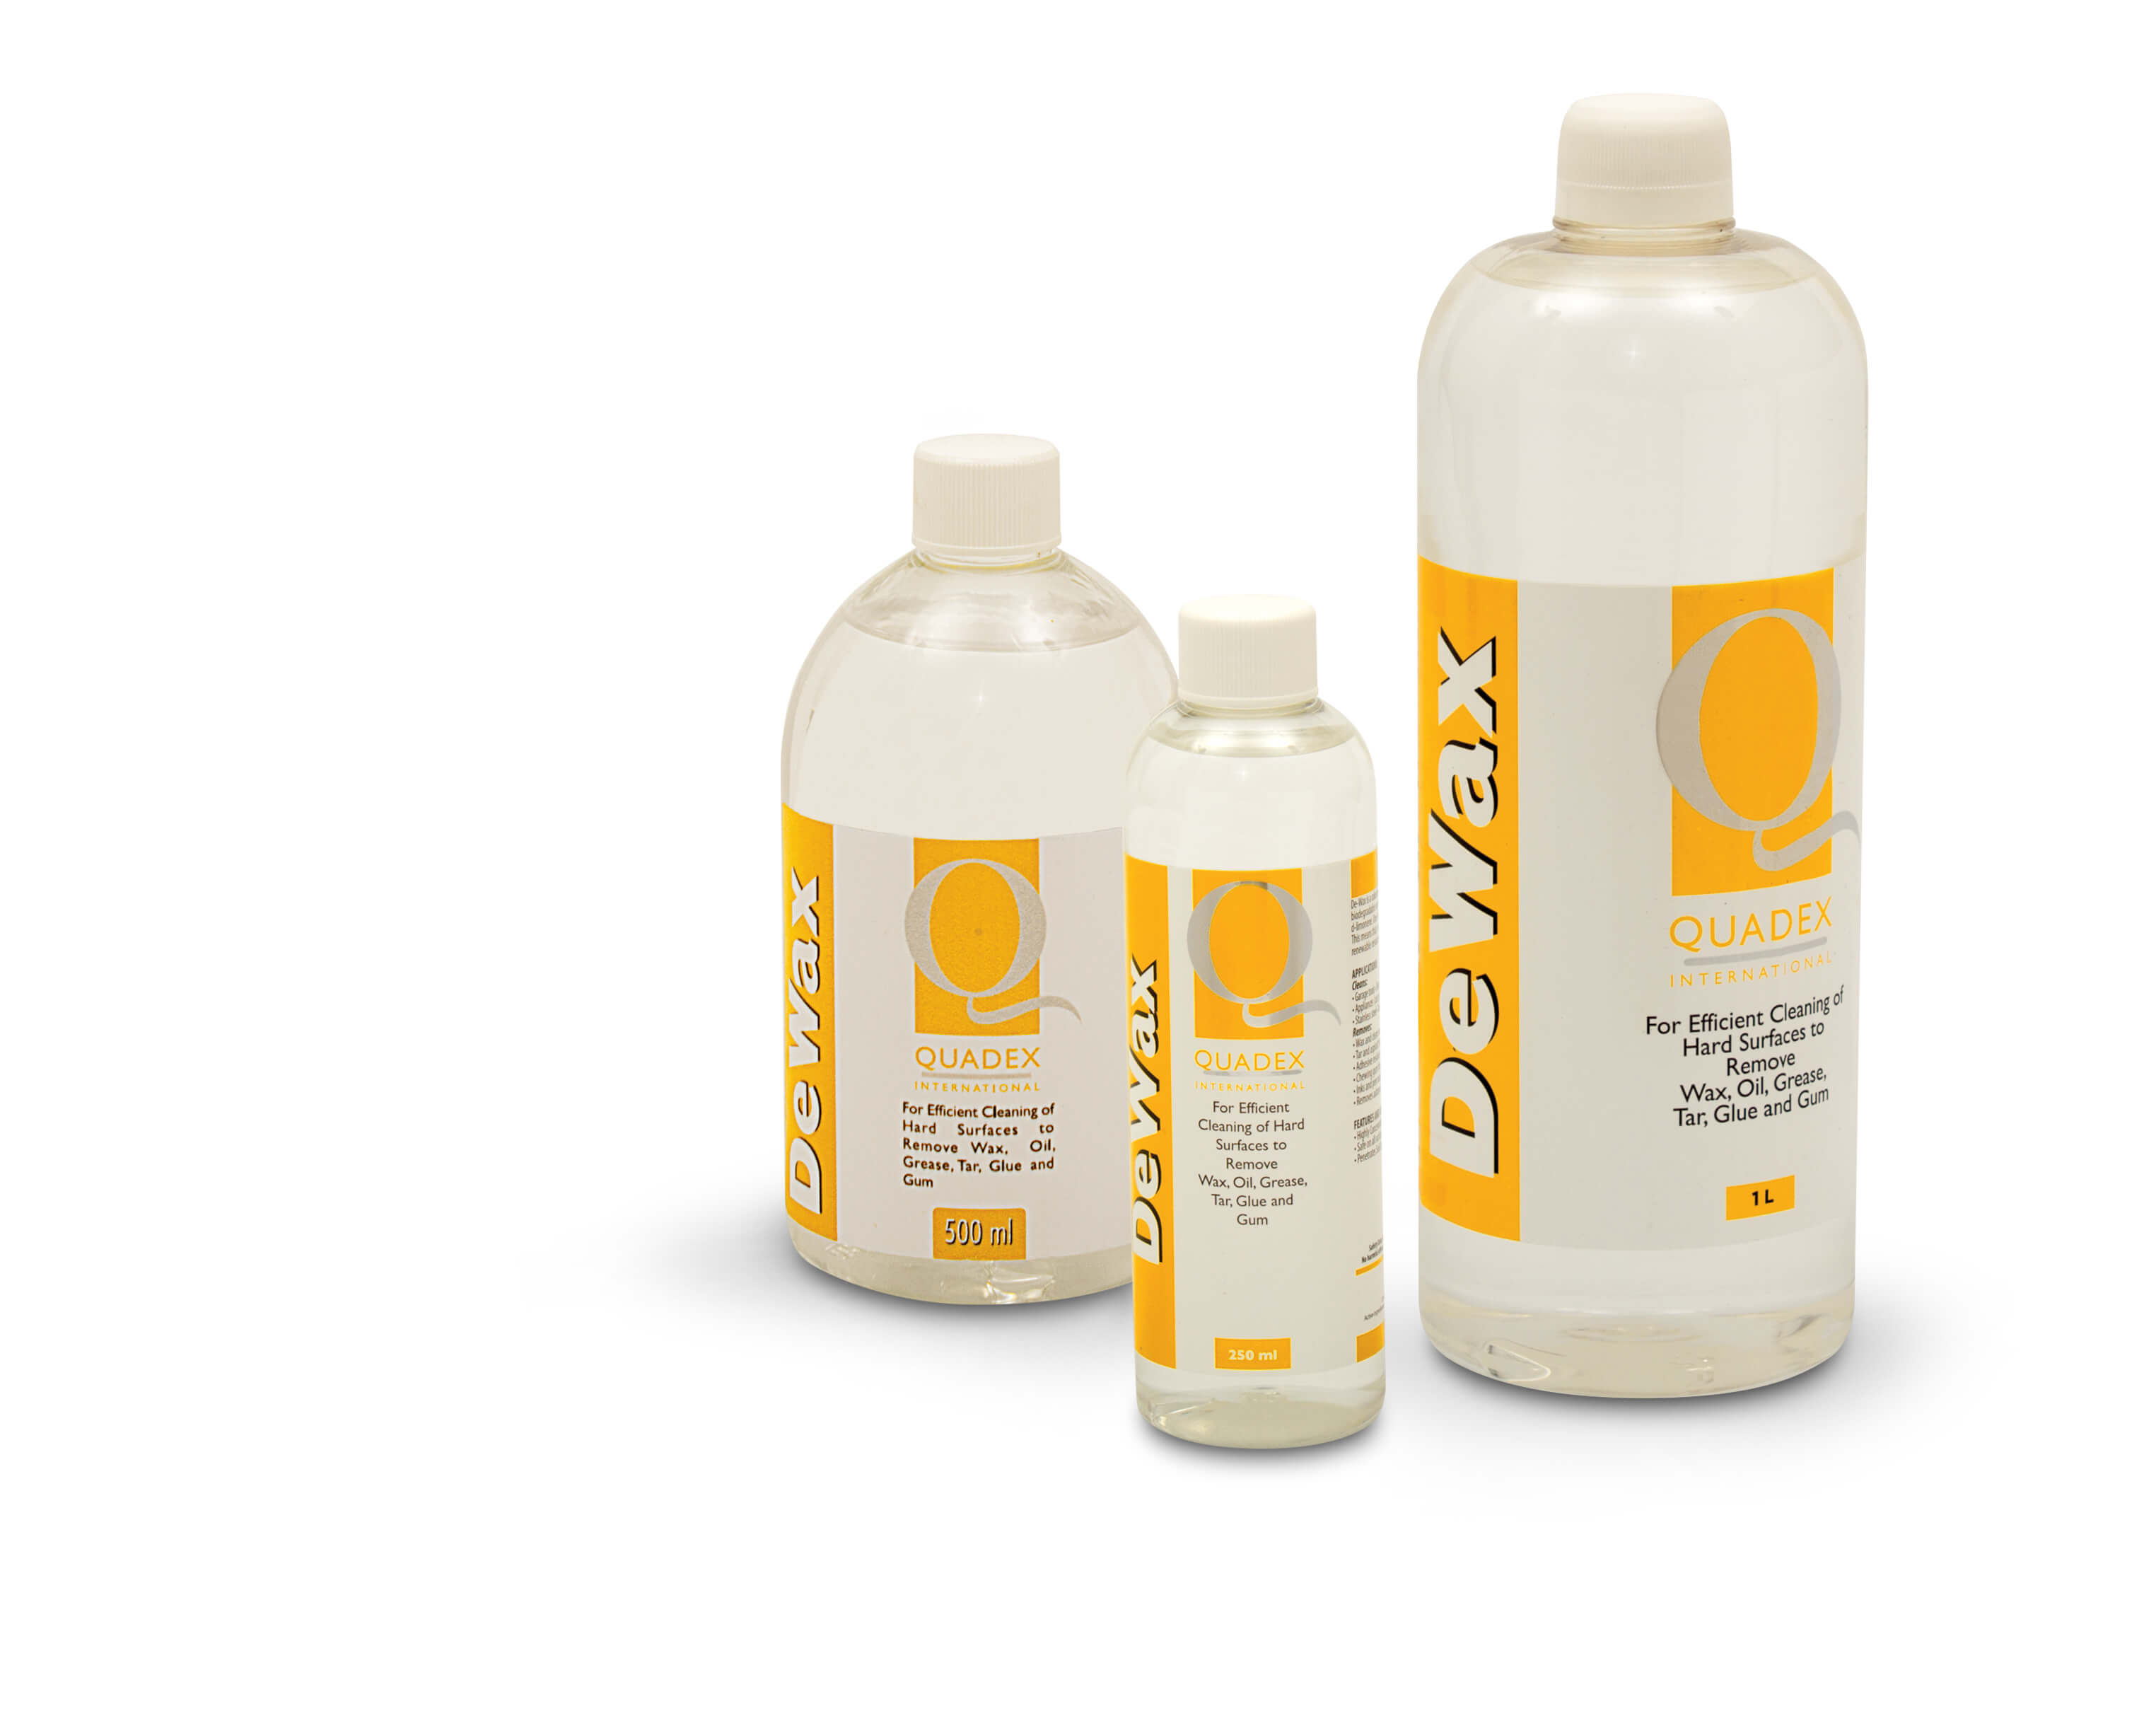 NATURAL READY-TO-USE CITRUS SOLVENT, REMOVES WAX & GLUE